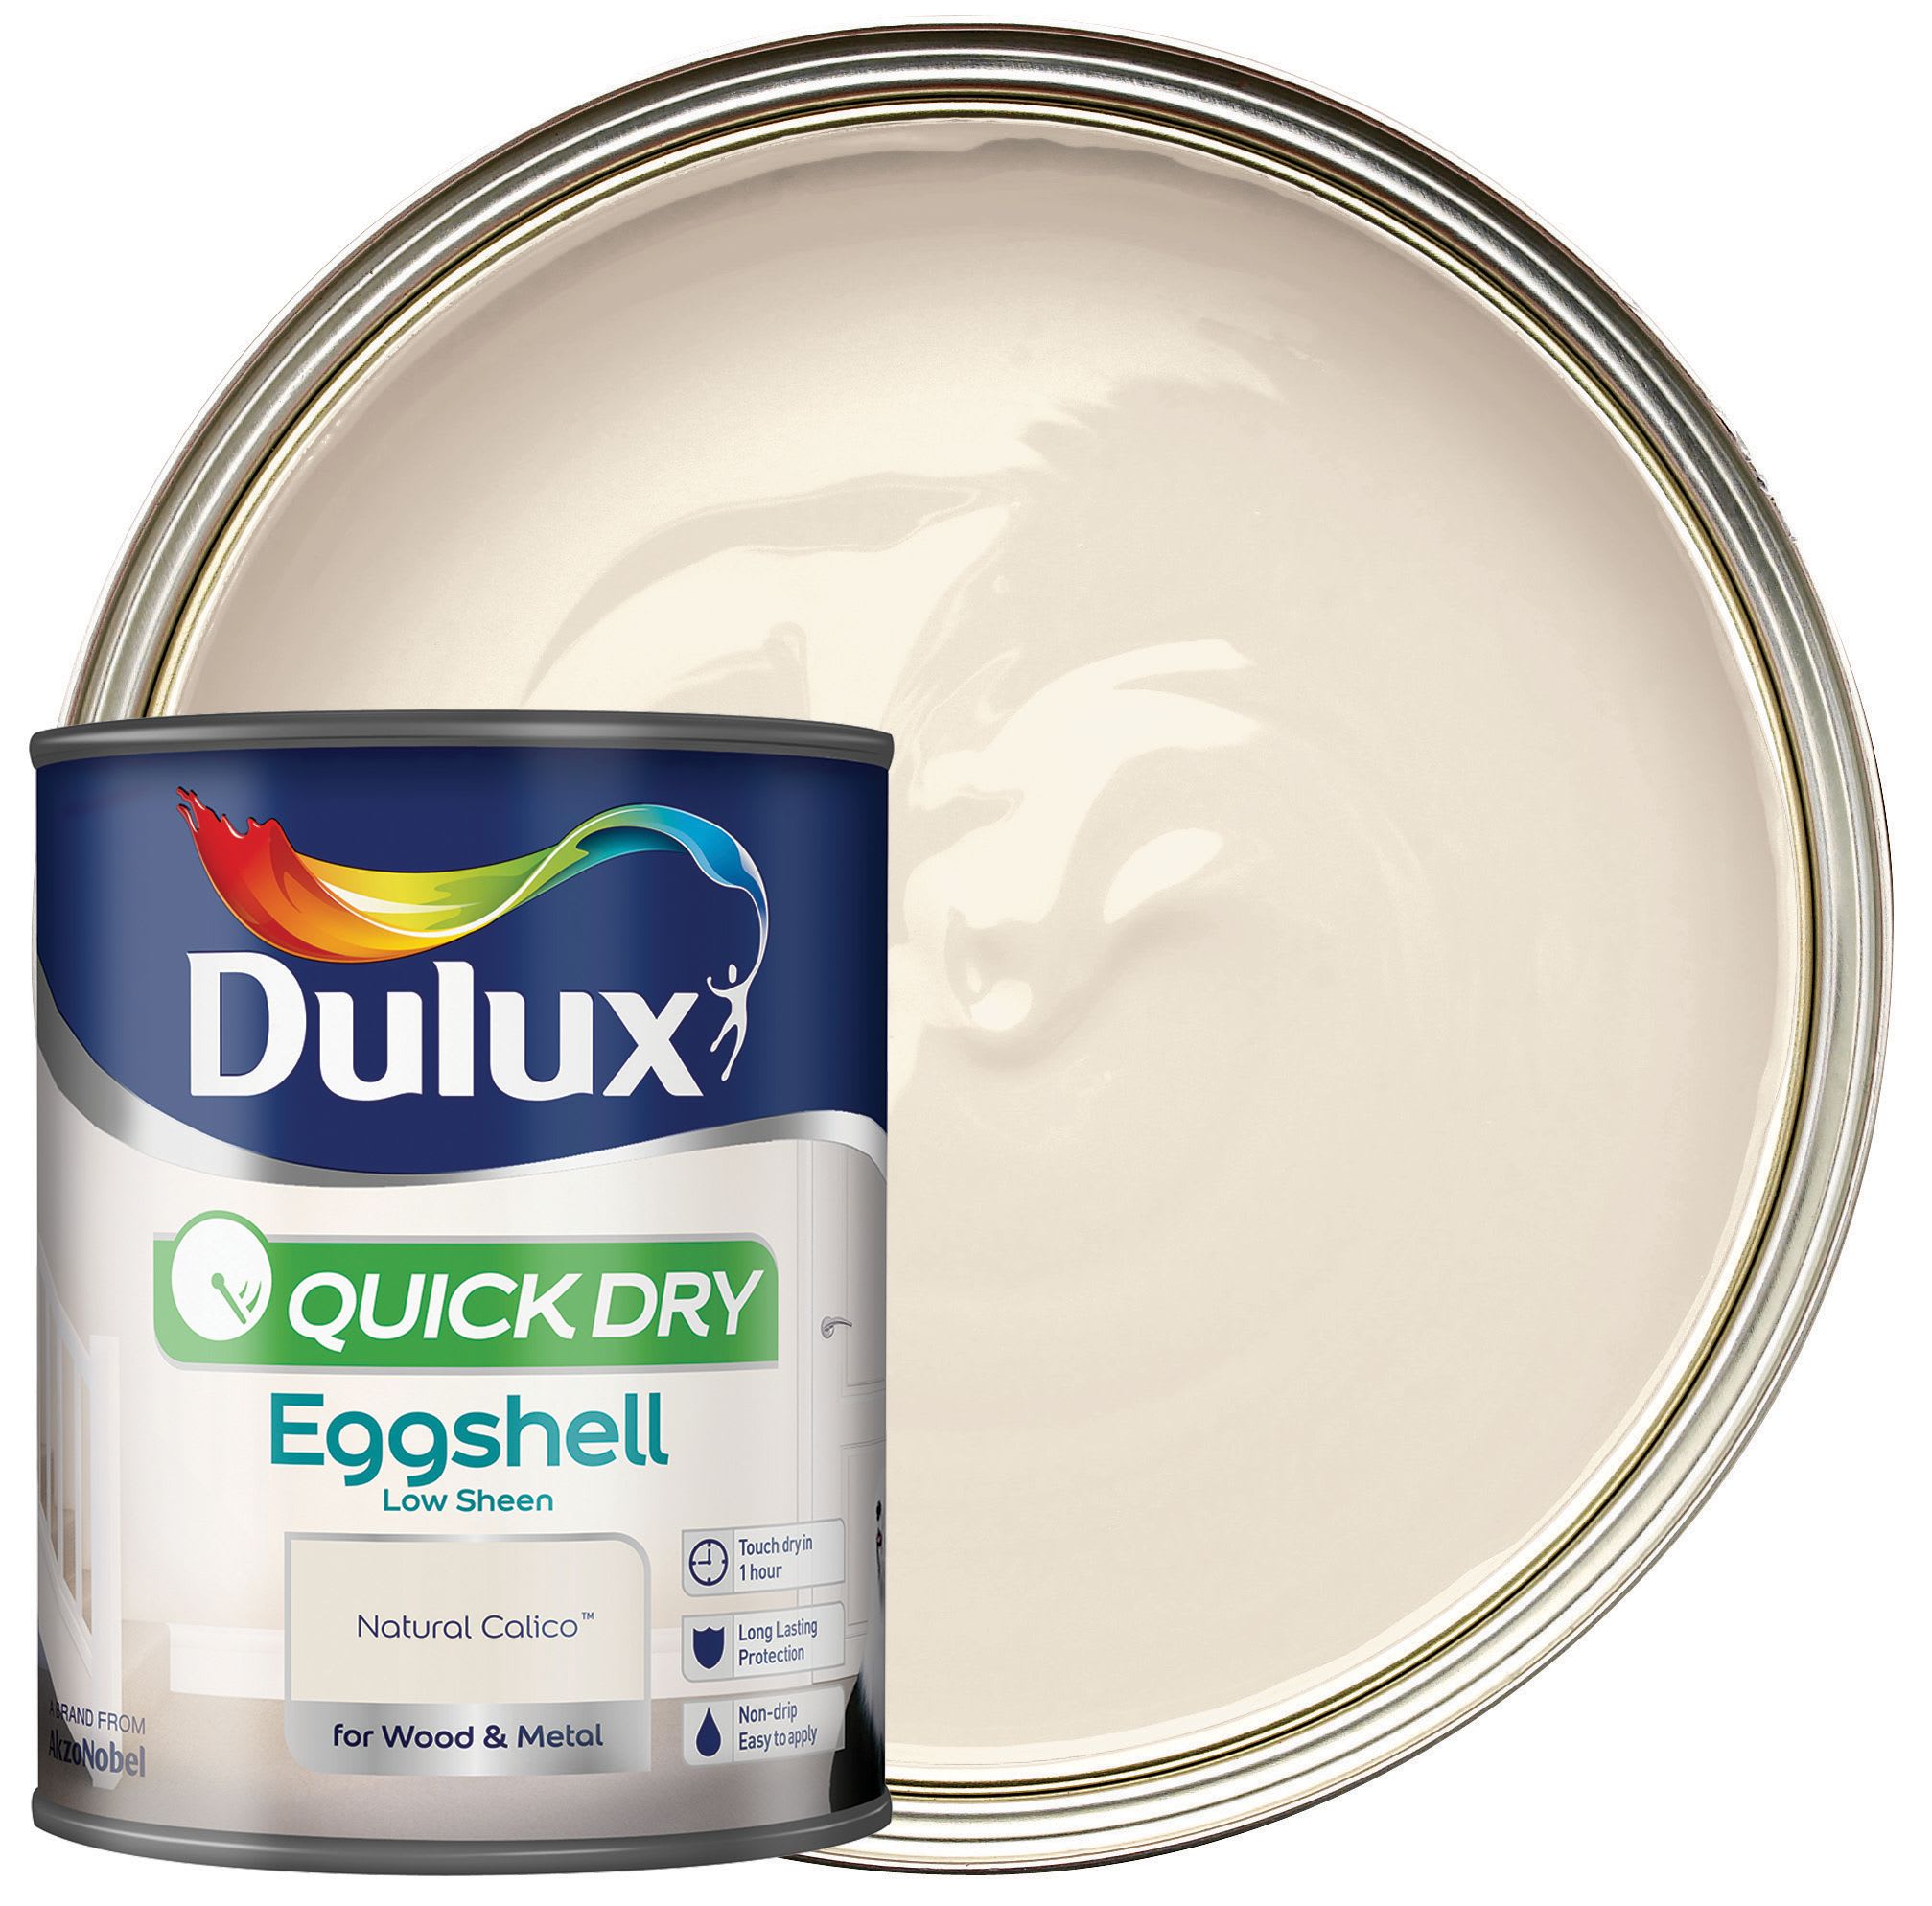 Dulux Quick Dry Eggshell Paint - Natural Calico